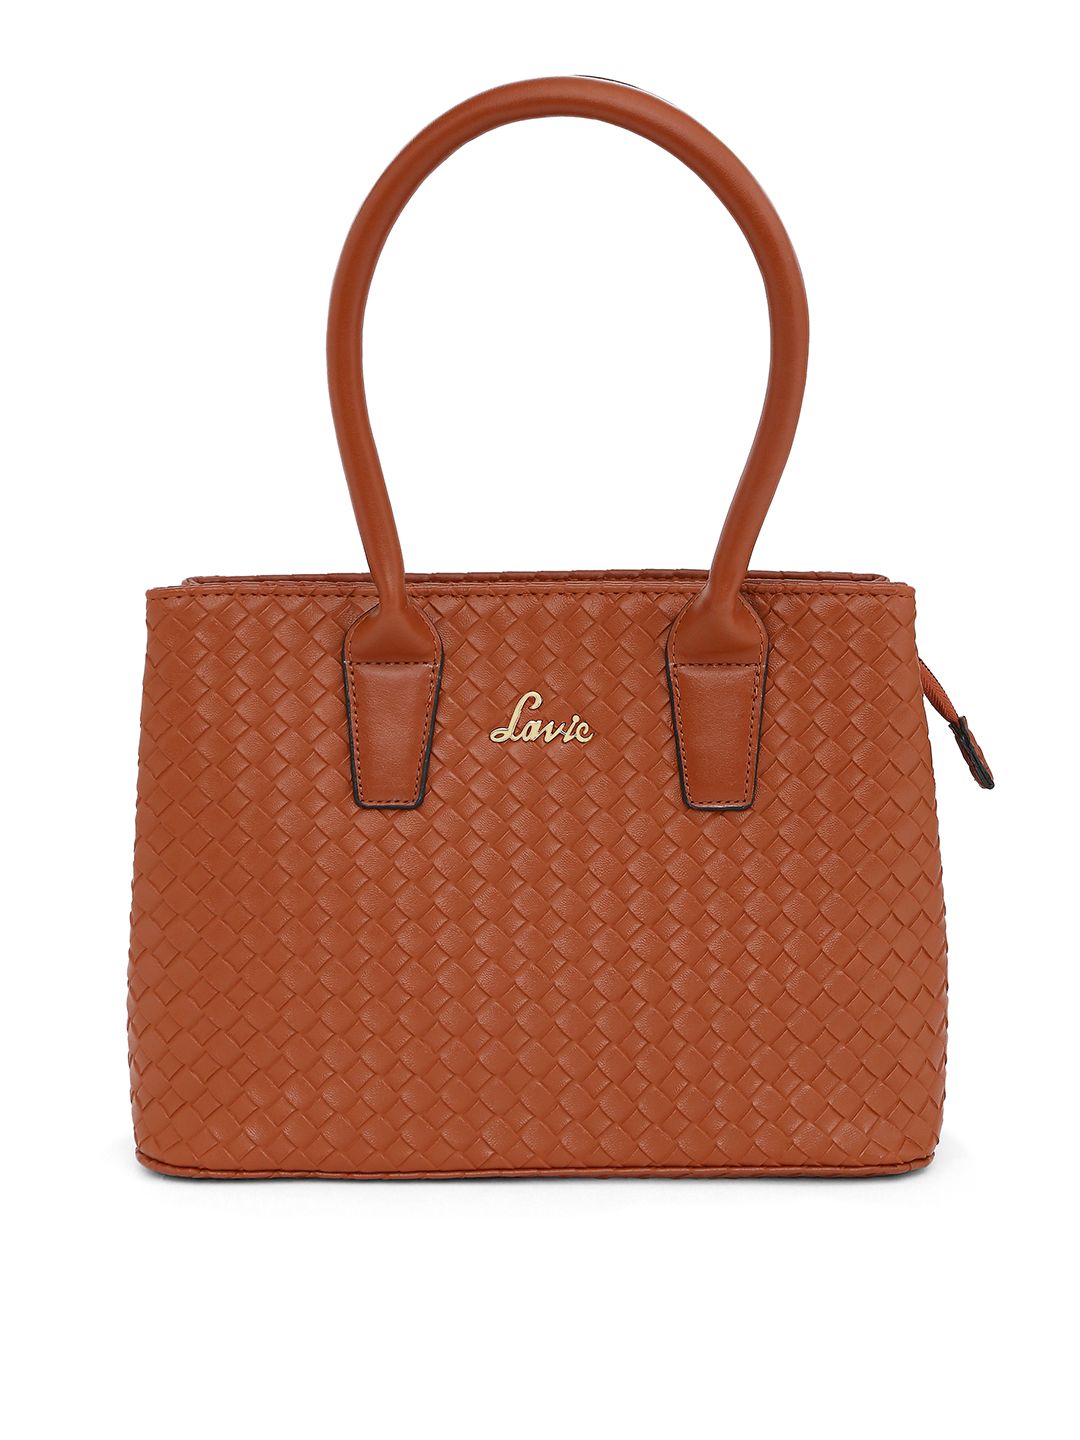 Lavie Tan Brown Textured FICSY Structured Shoulder Bag Price in India